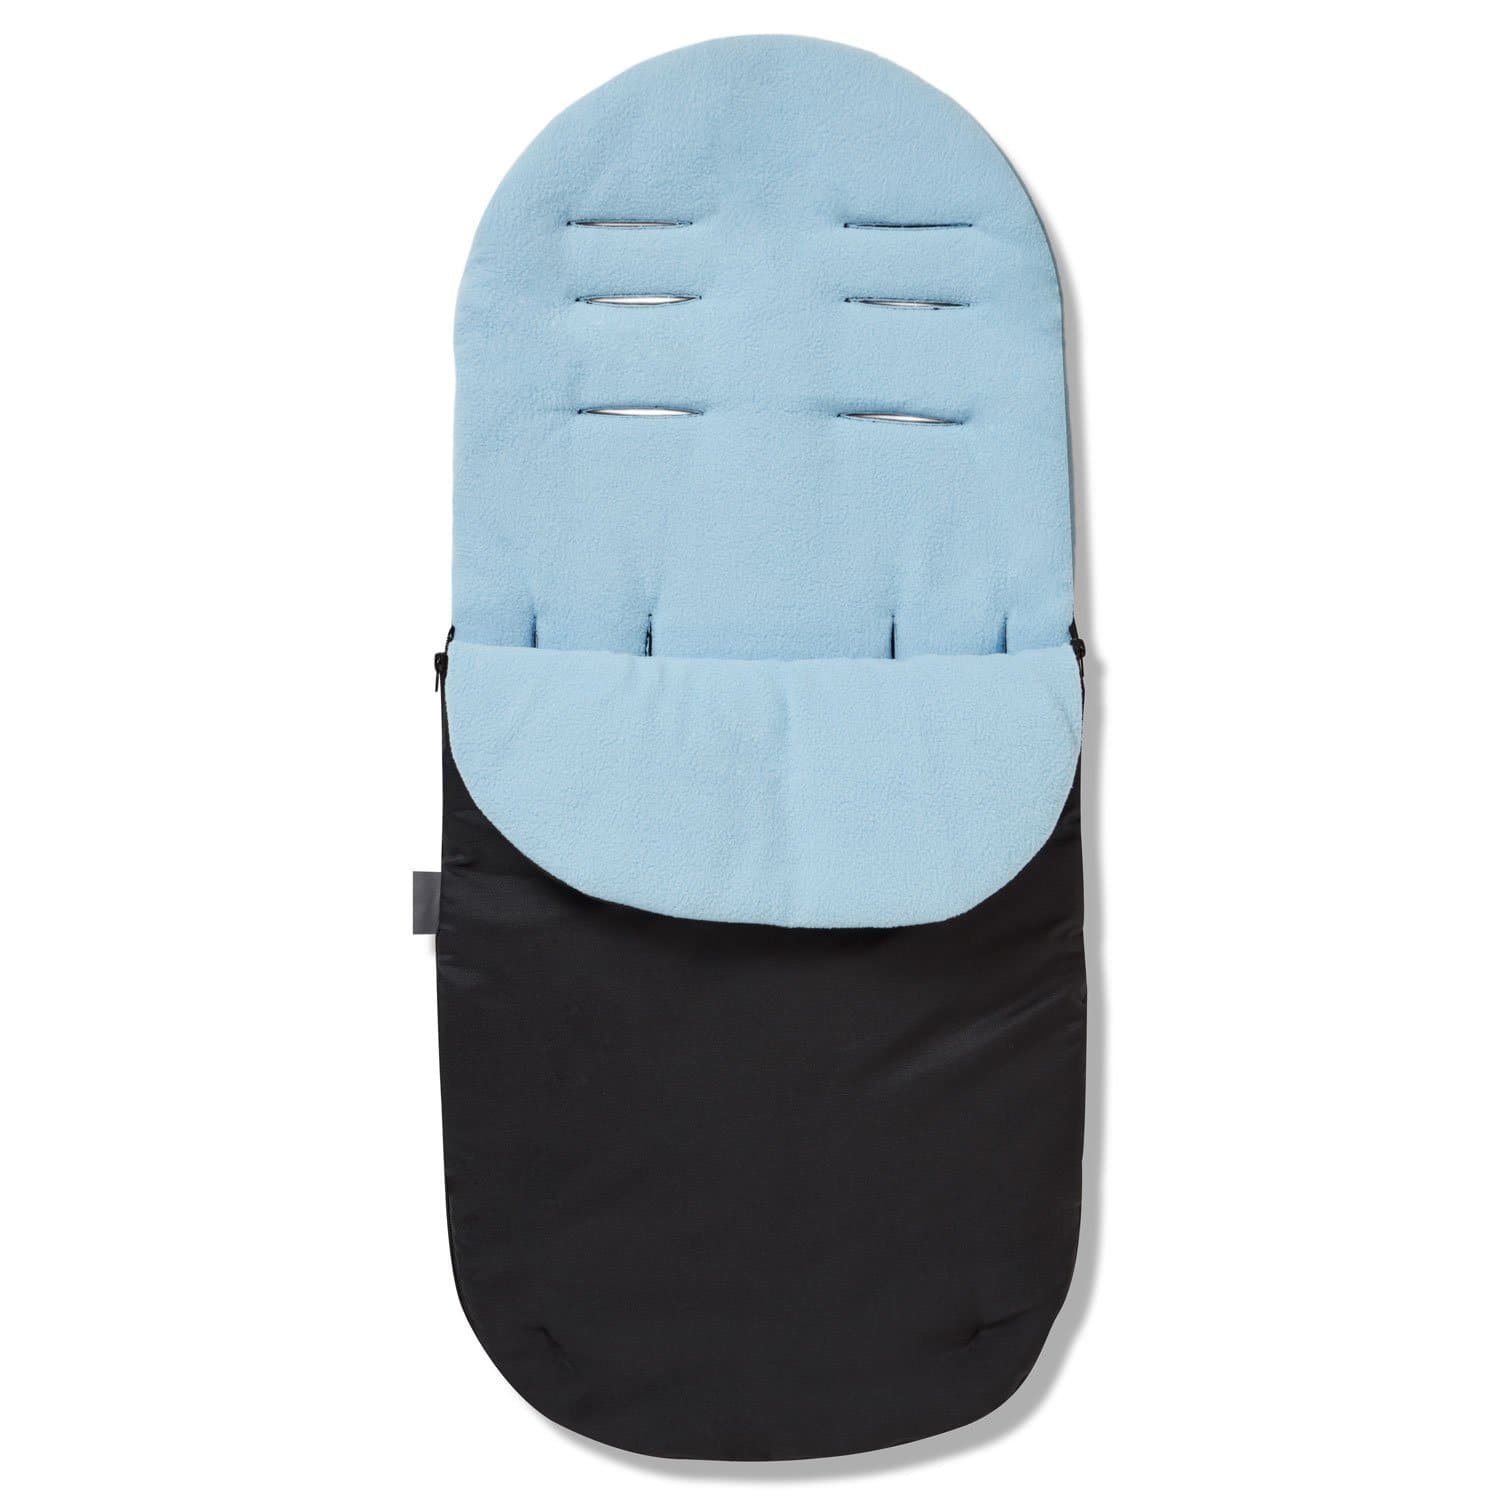 Footmuff / Cosy Toes Compatible with Graco - Light Blue / Fits All Models | For Your Little One